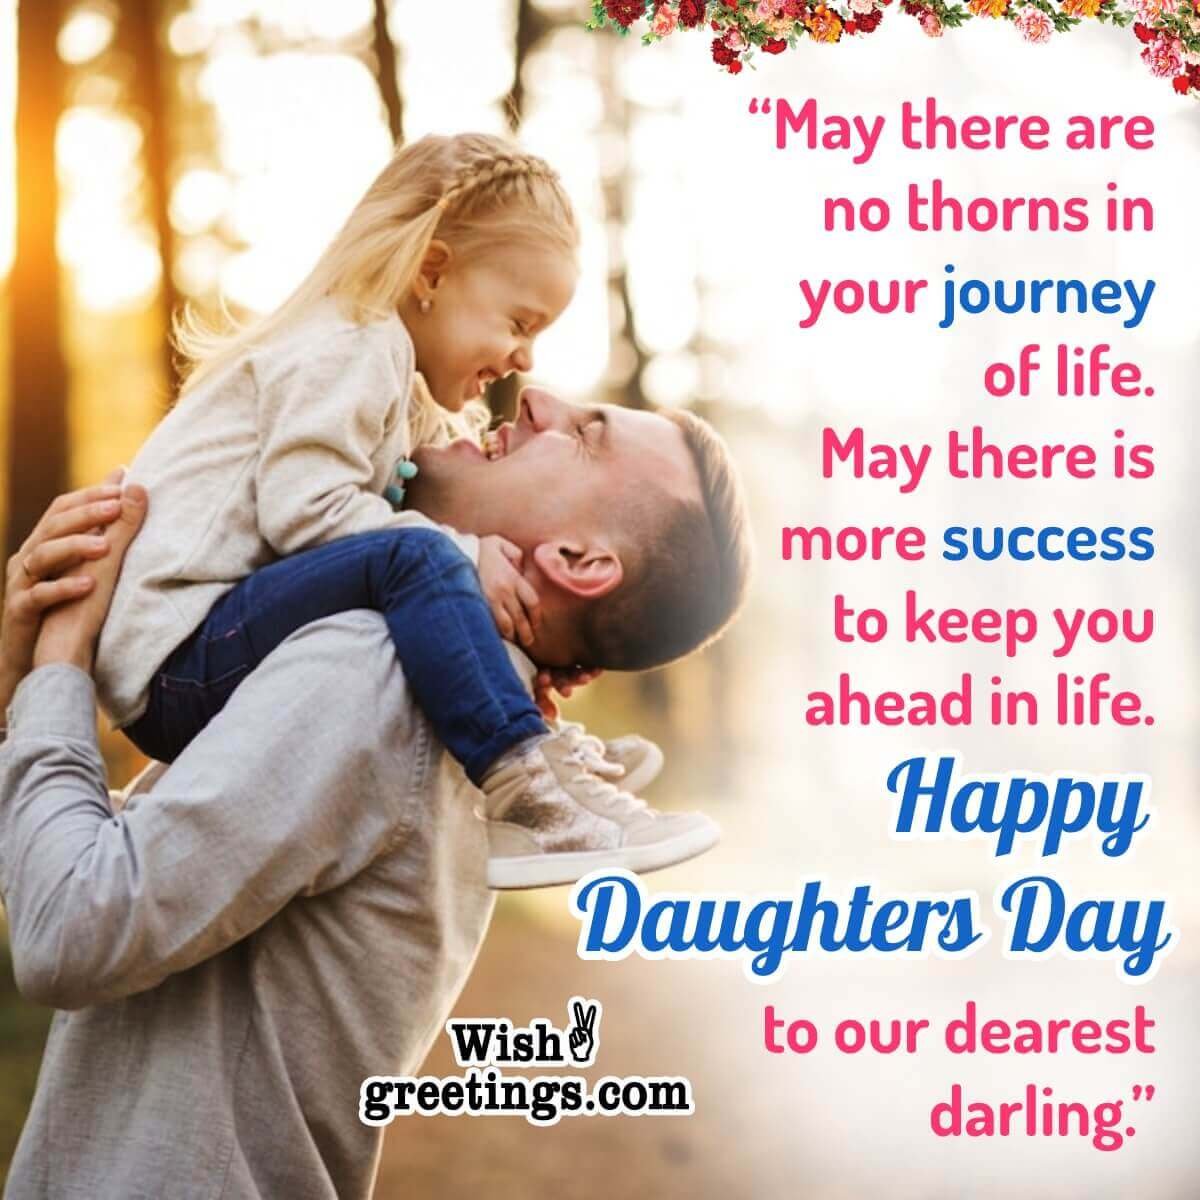 Happy Daughters Day To Our Dearest Darling